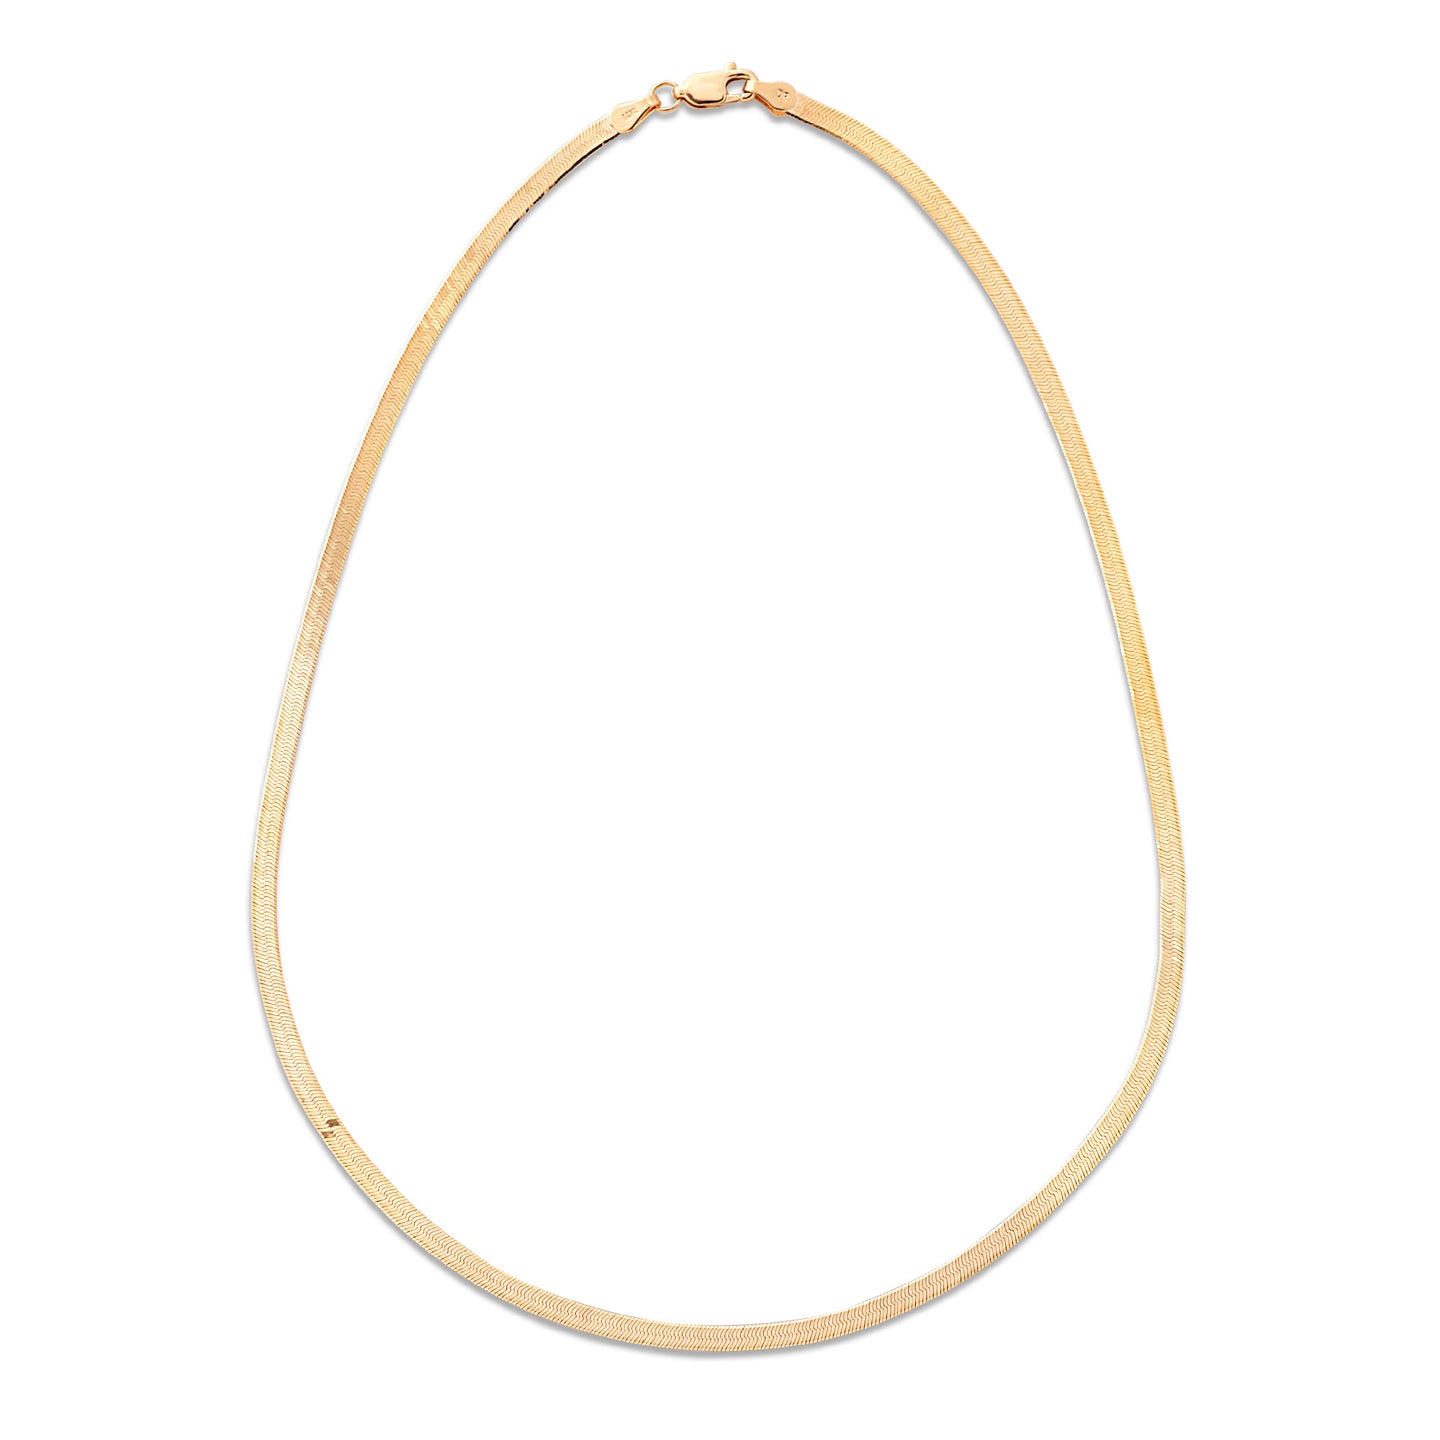 Yellow Gold 3mm Wide herringbone Chain Necklace